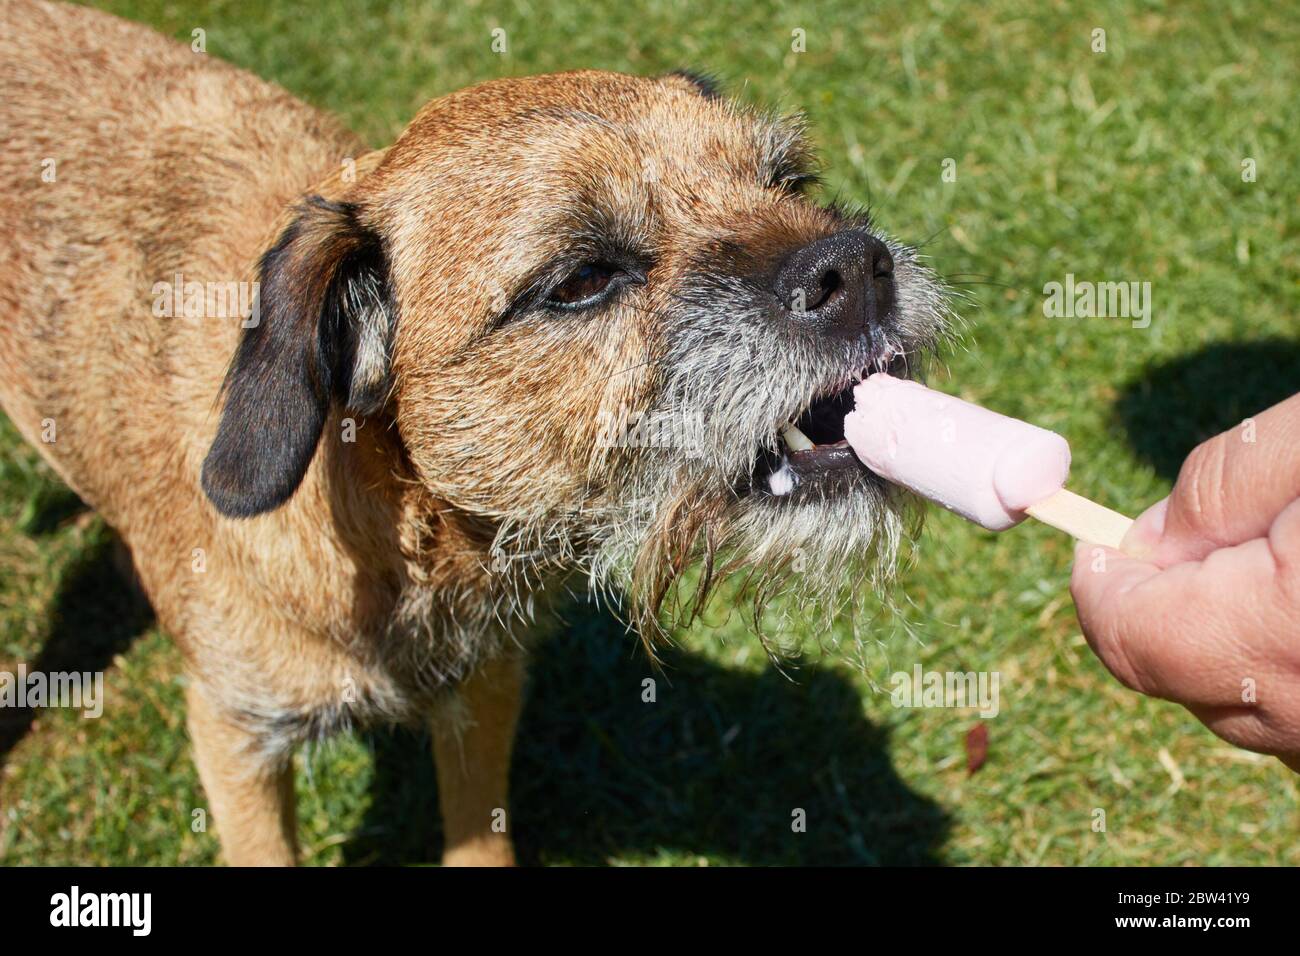 Herne Bay, Kent, UK. 29th May 2020: UK Weather. Toddy the Border Terrier cools down with an icecream after a long walk on a warm sunny day. Credit: Alan Payton/Alamy Live News Stock Photo